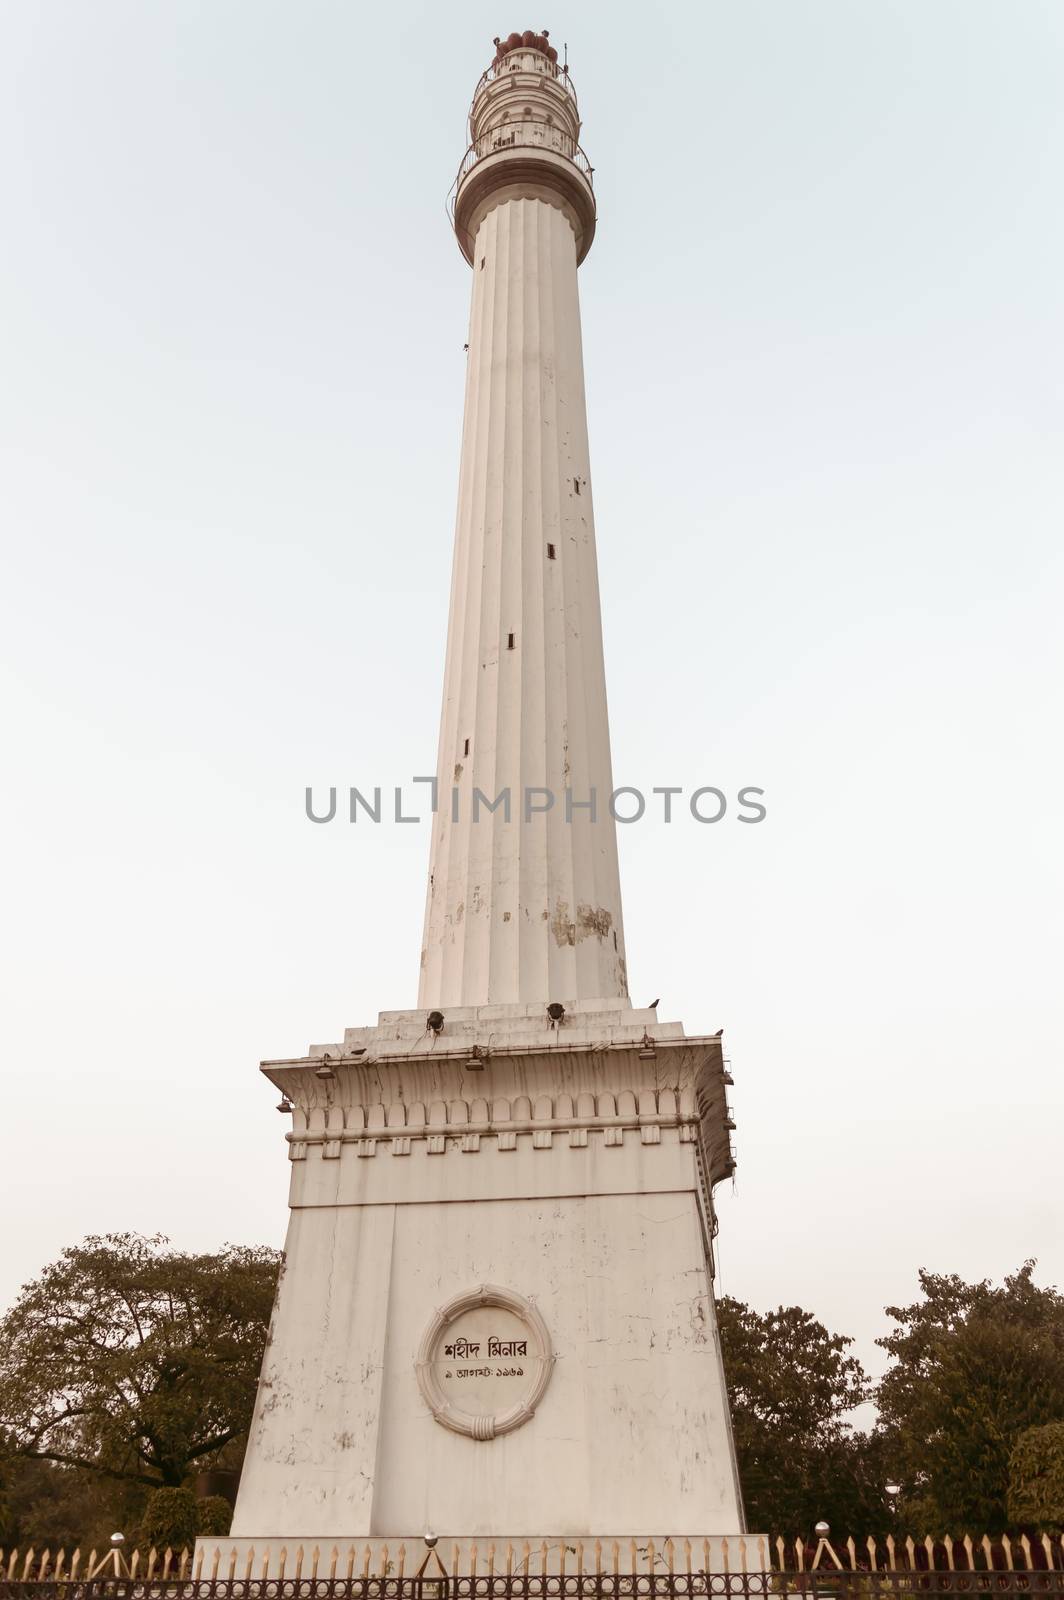 Shaheed Minar Martyrs Ochterlony Monument, famous pillar minaret architectural column lighthouse representing memory British East India Company victory over Nepalese War, Kolkata West Bengal May 2019. by sudiptabhowmick